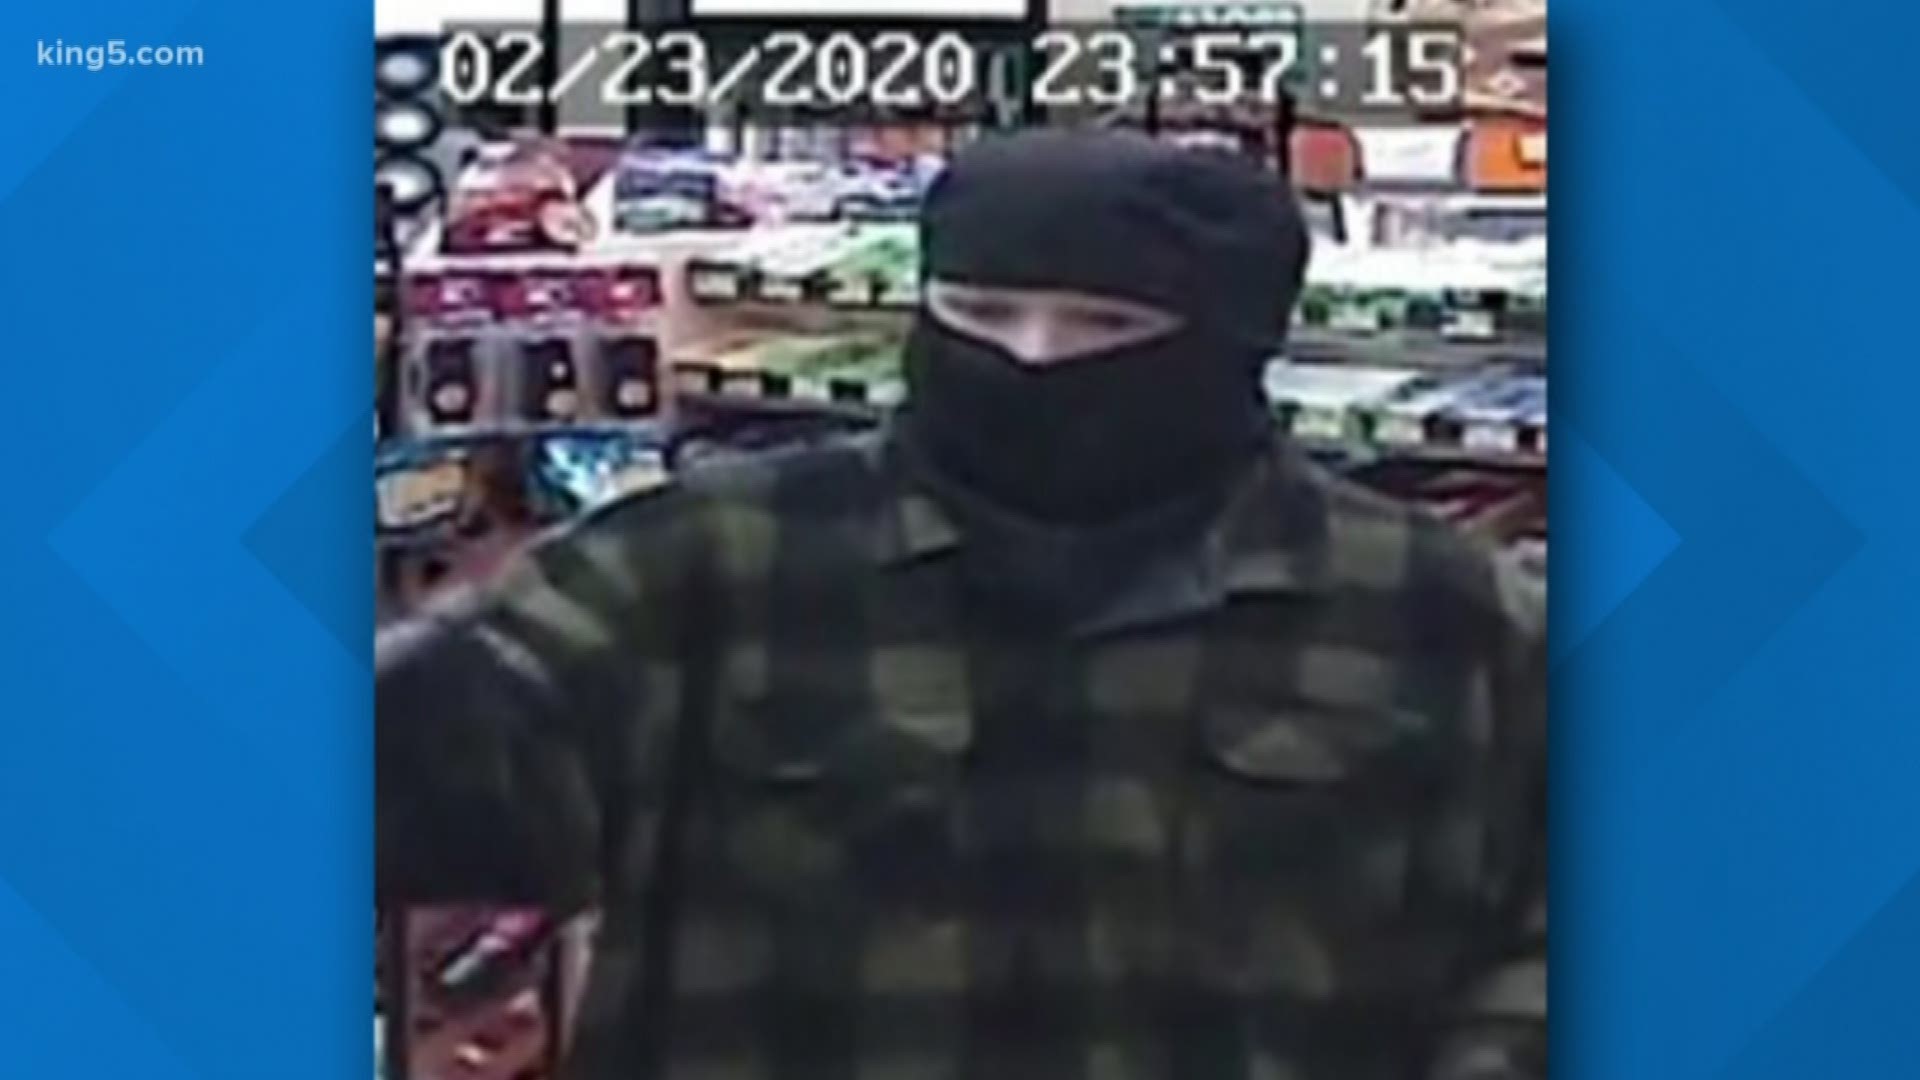 Police said a clerk at an AMPM in Everett believes the same suspect may have robbed the store on Feb. 16 and Feb. 24.